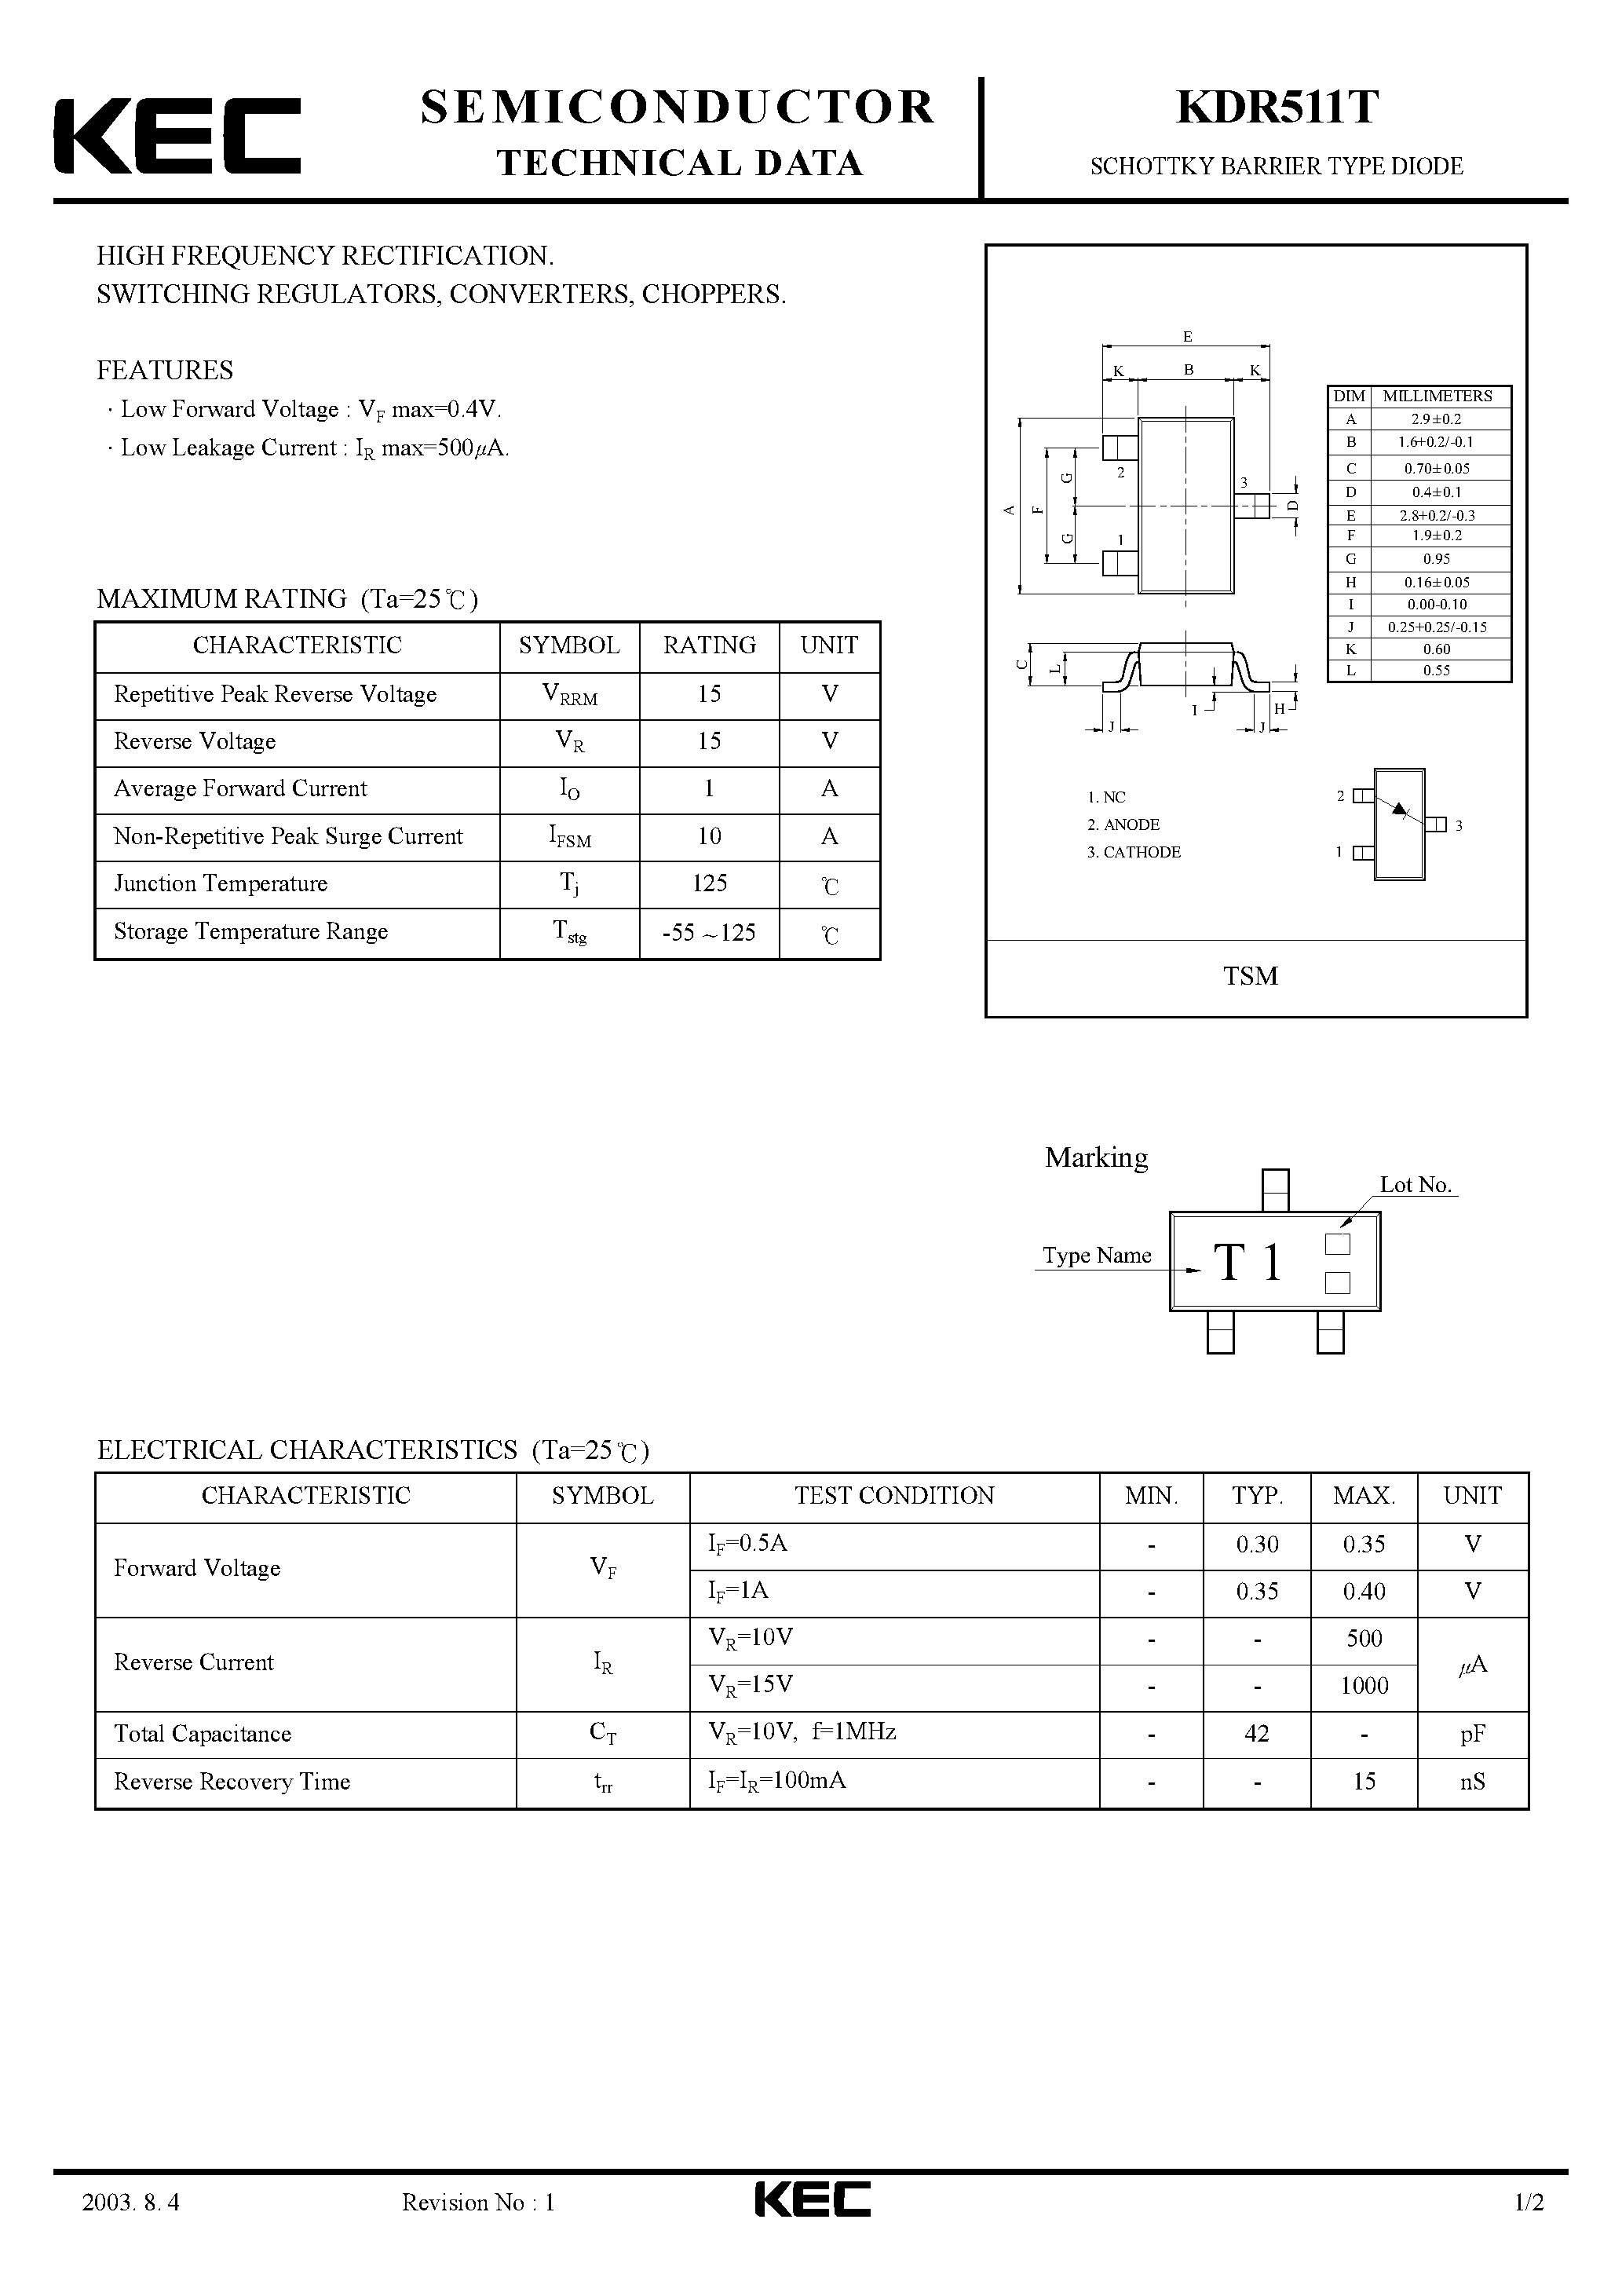 Datasheet KDR511T - SCHOTTKY BARRIER TYPE DIODE(HIGH FREQUENCY RECTIFICATION/ SWITCHING/ REGULATORS/ CONVERTERS/ CHOPPERS) page 1